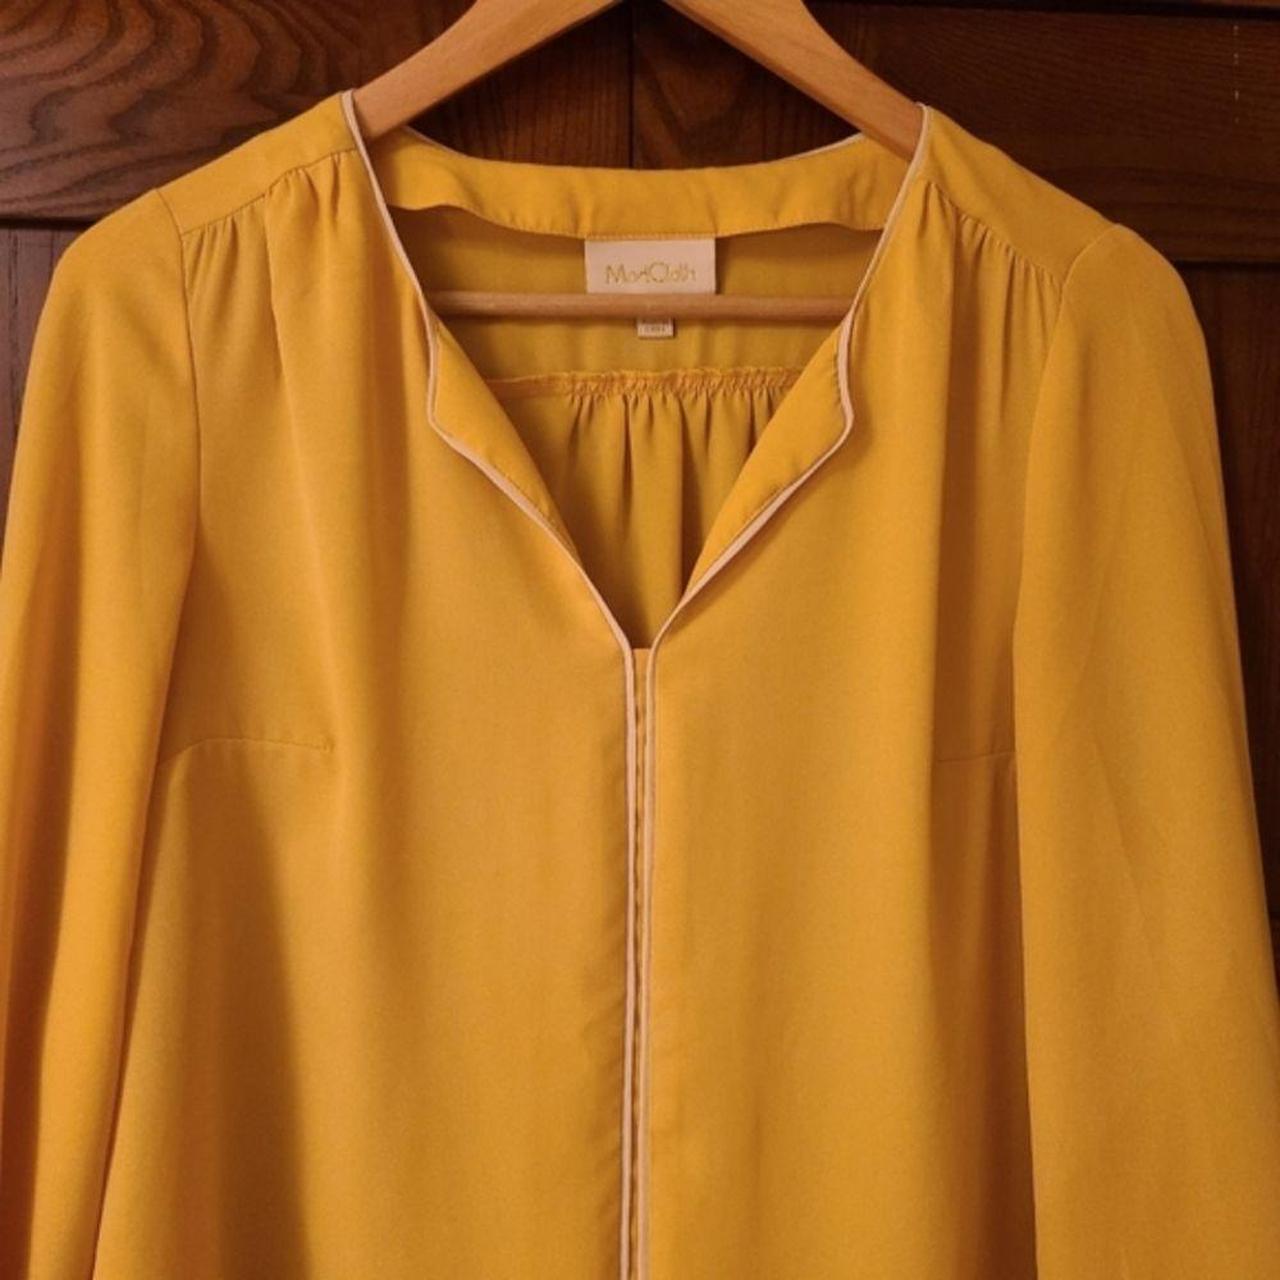 Product Image 2 - Modcloth Mustard Yellow Blouse with